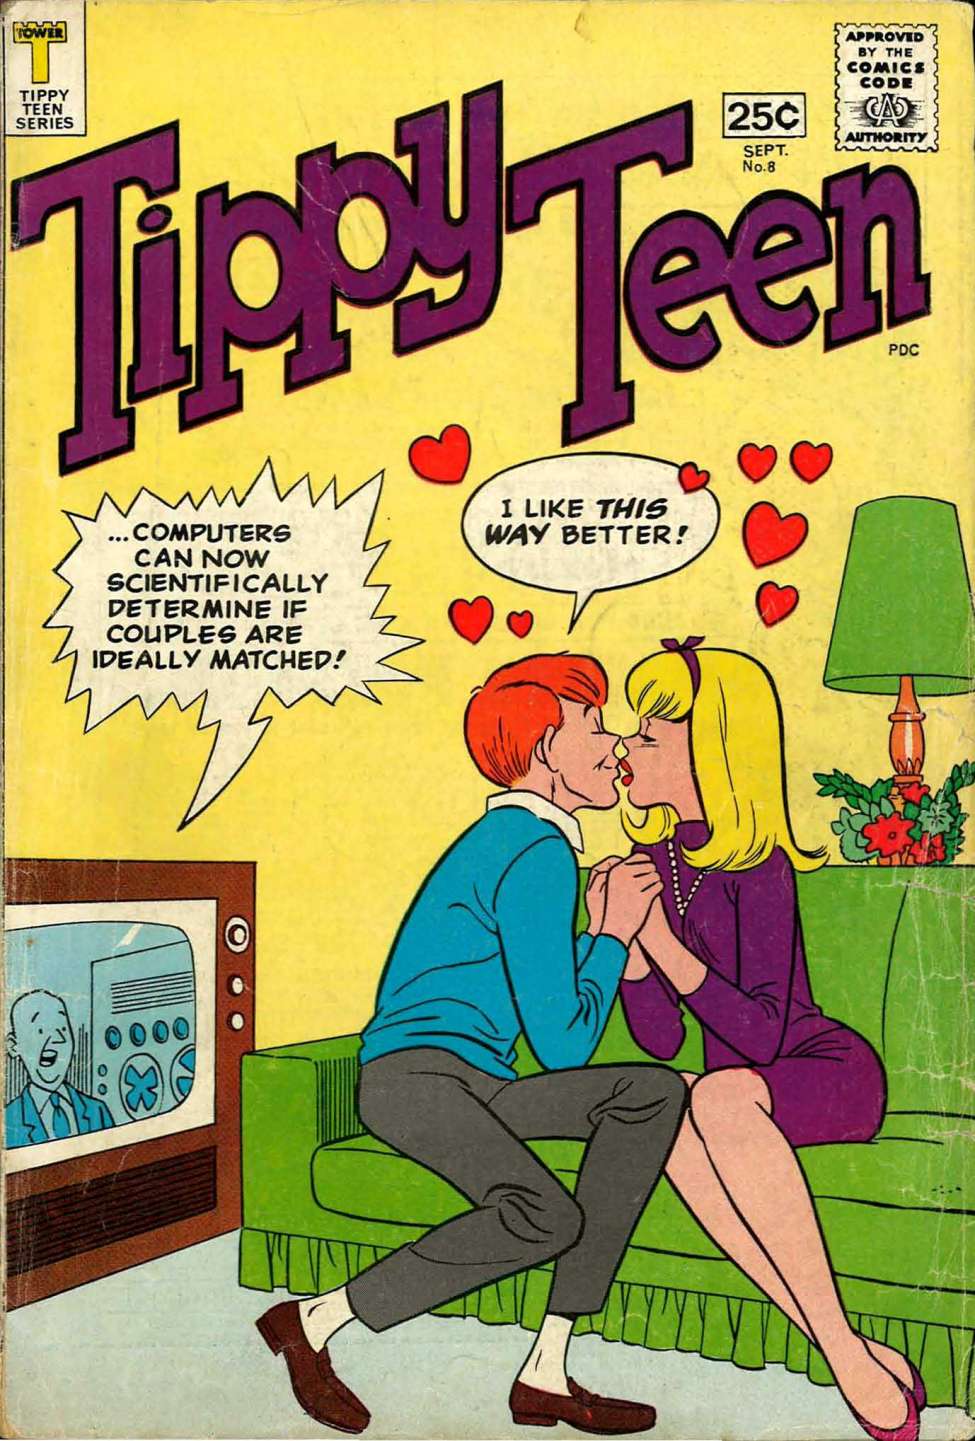 Book Cover For Tippy Teen 8